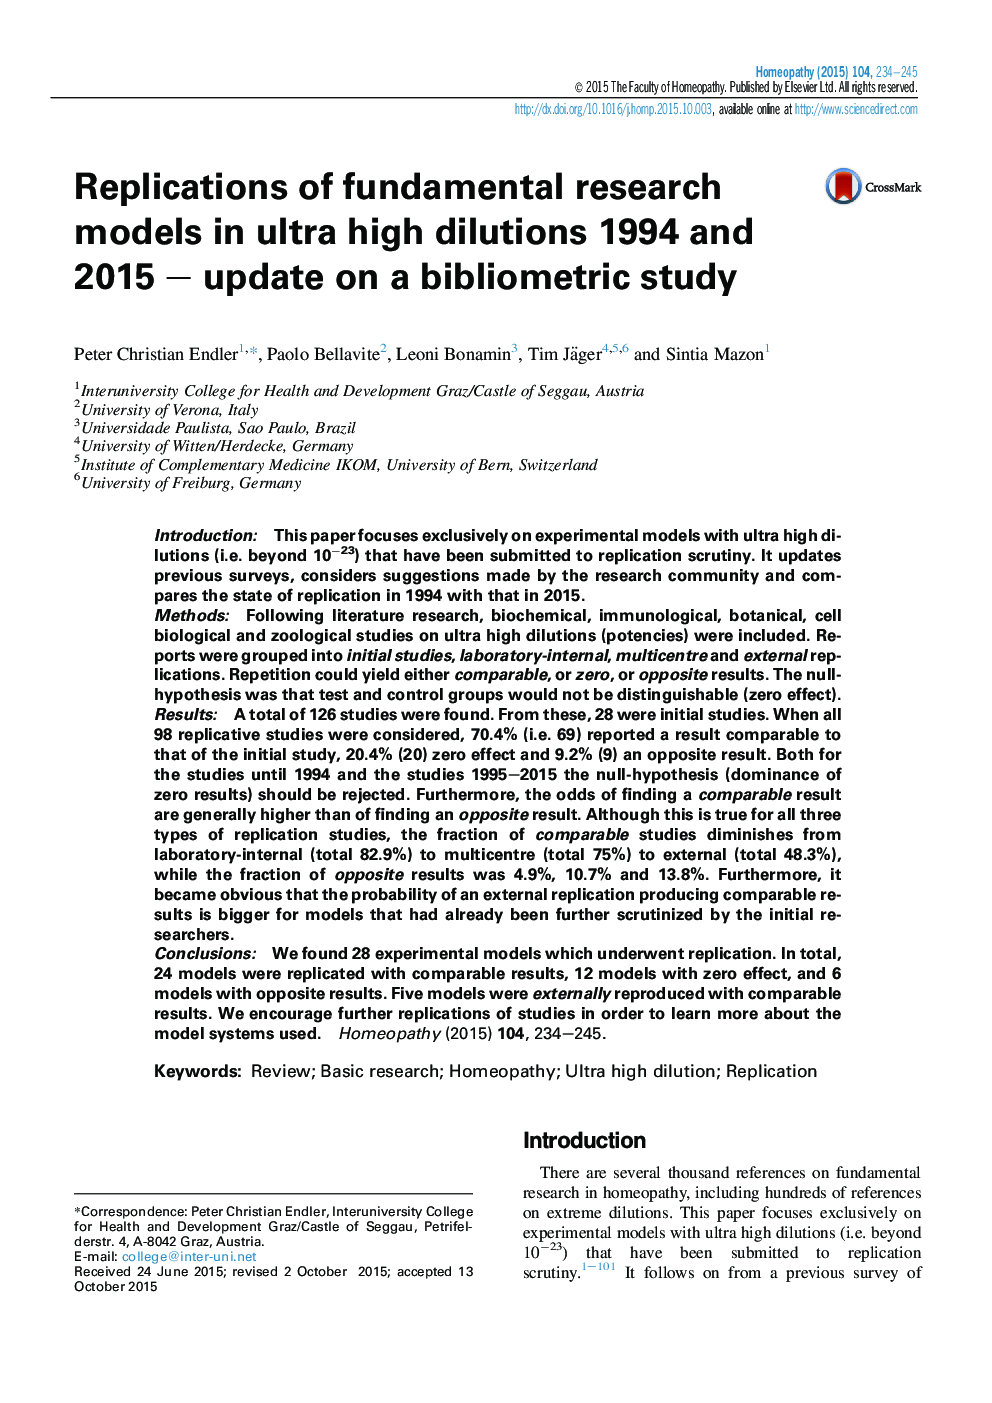 Replications of fundamental research models in ultra high dilutions 1994 and 2015 – update on a bibliometric study